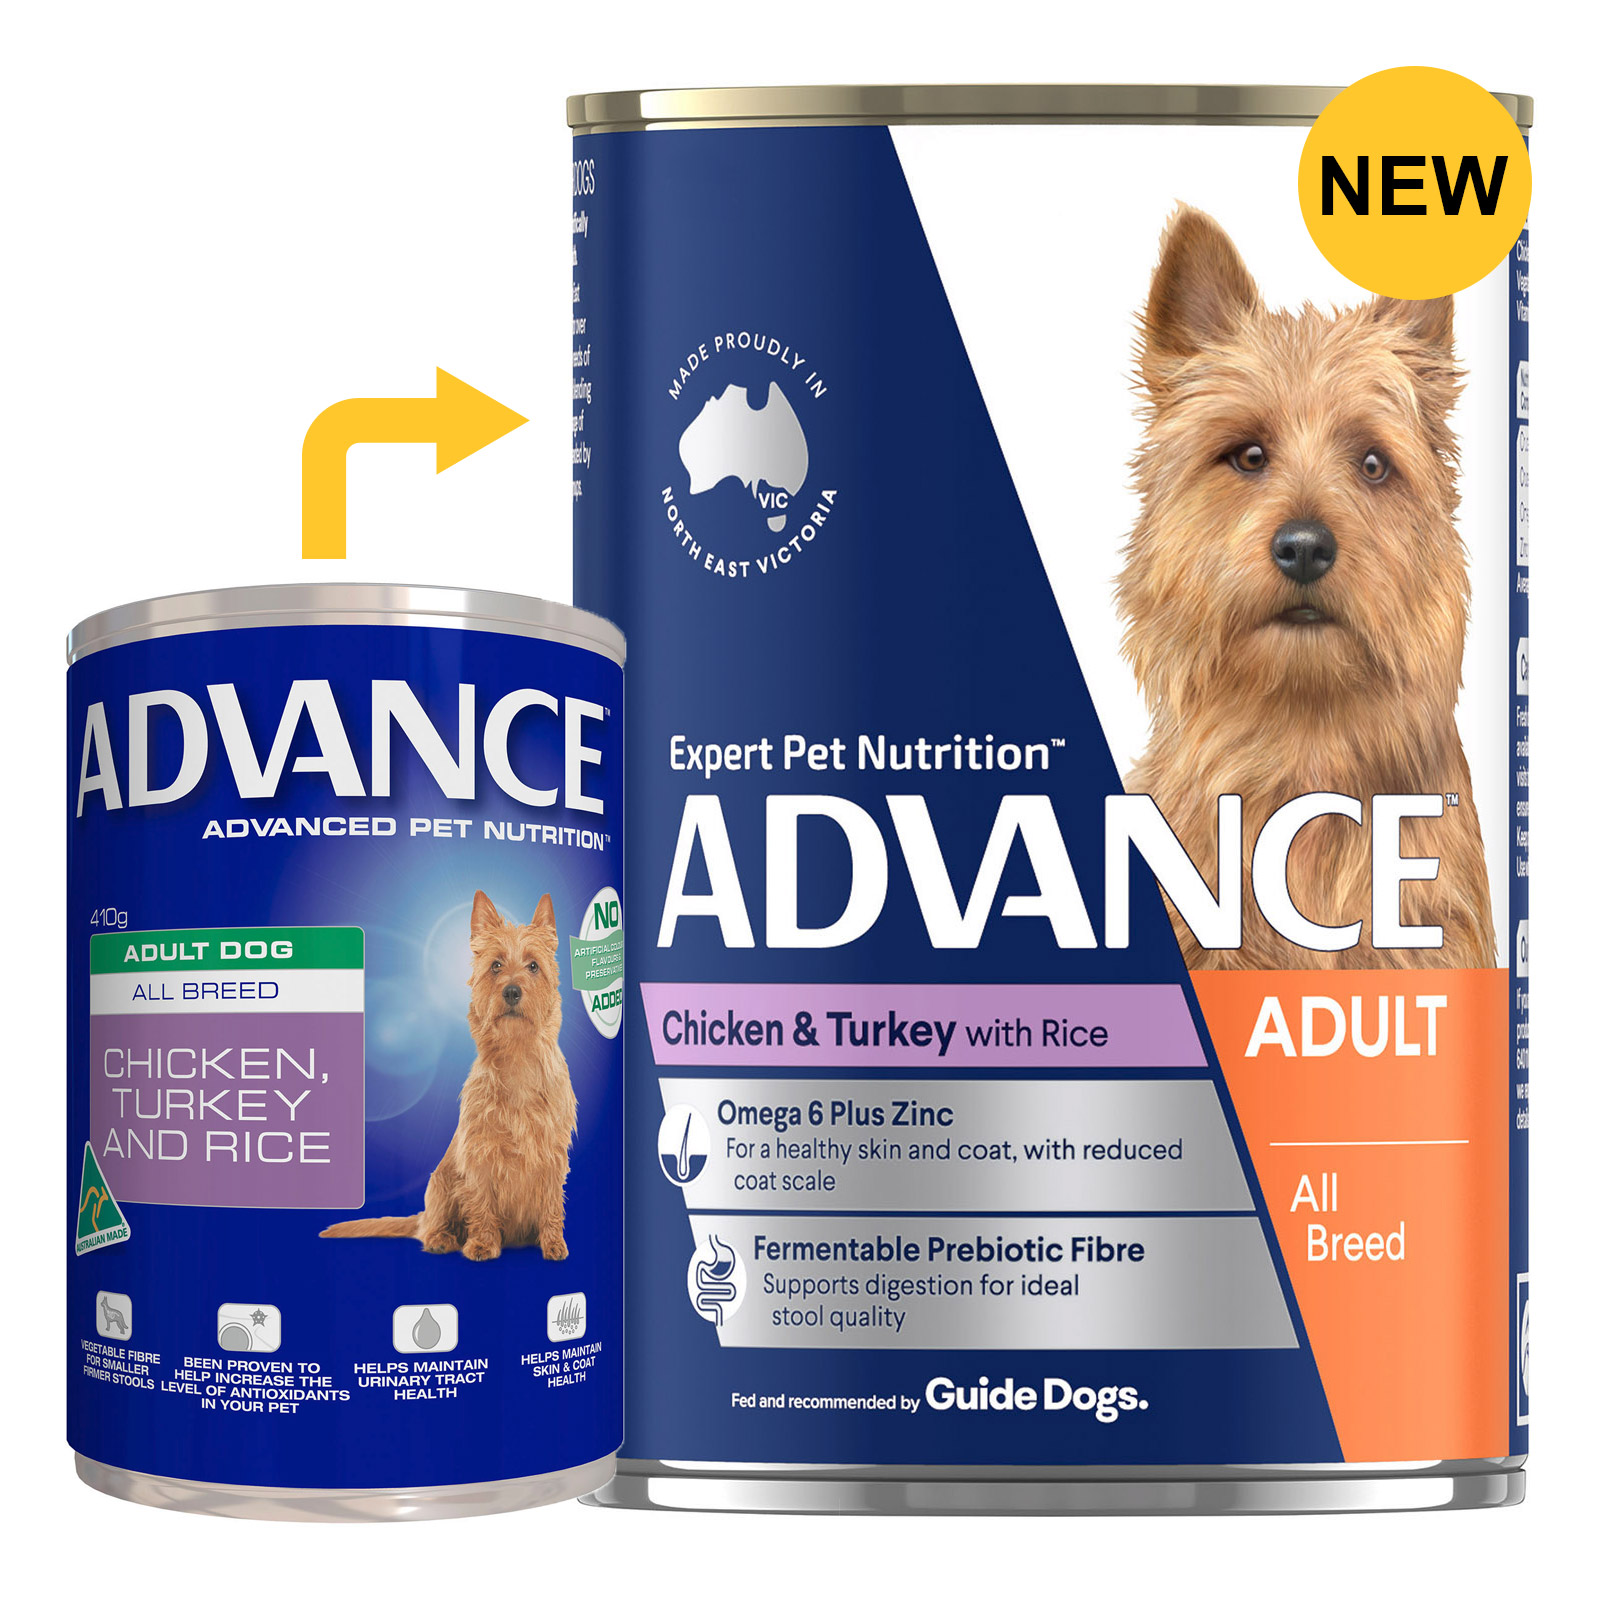 Advance Adult Dog All Breed with Chicken, Turkey & Rice Cans for Food